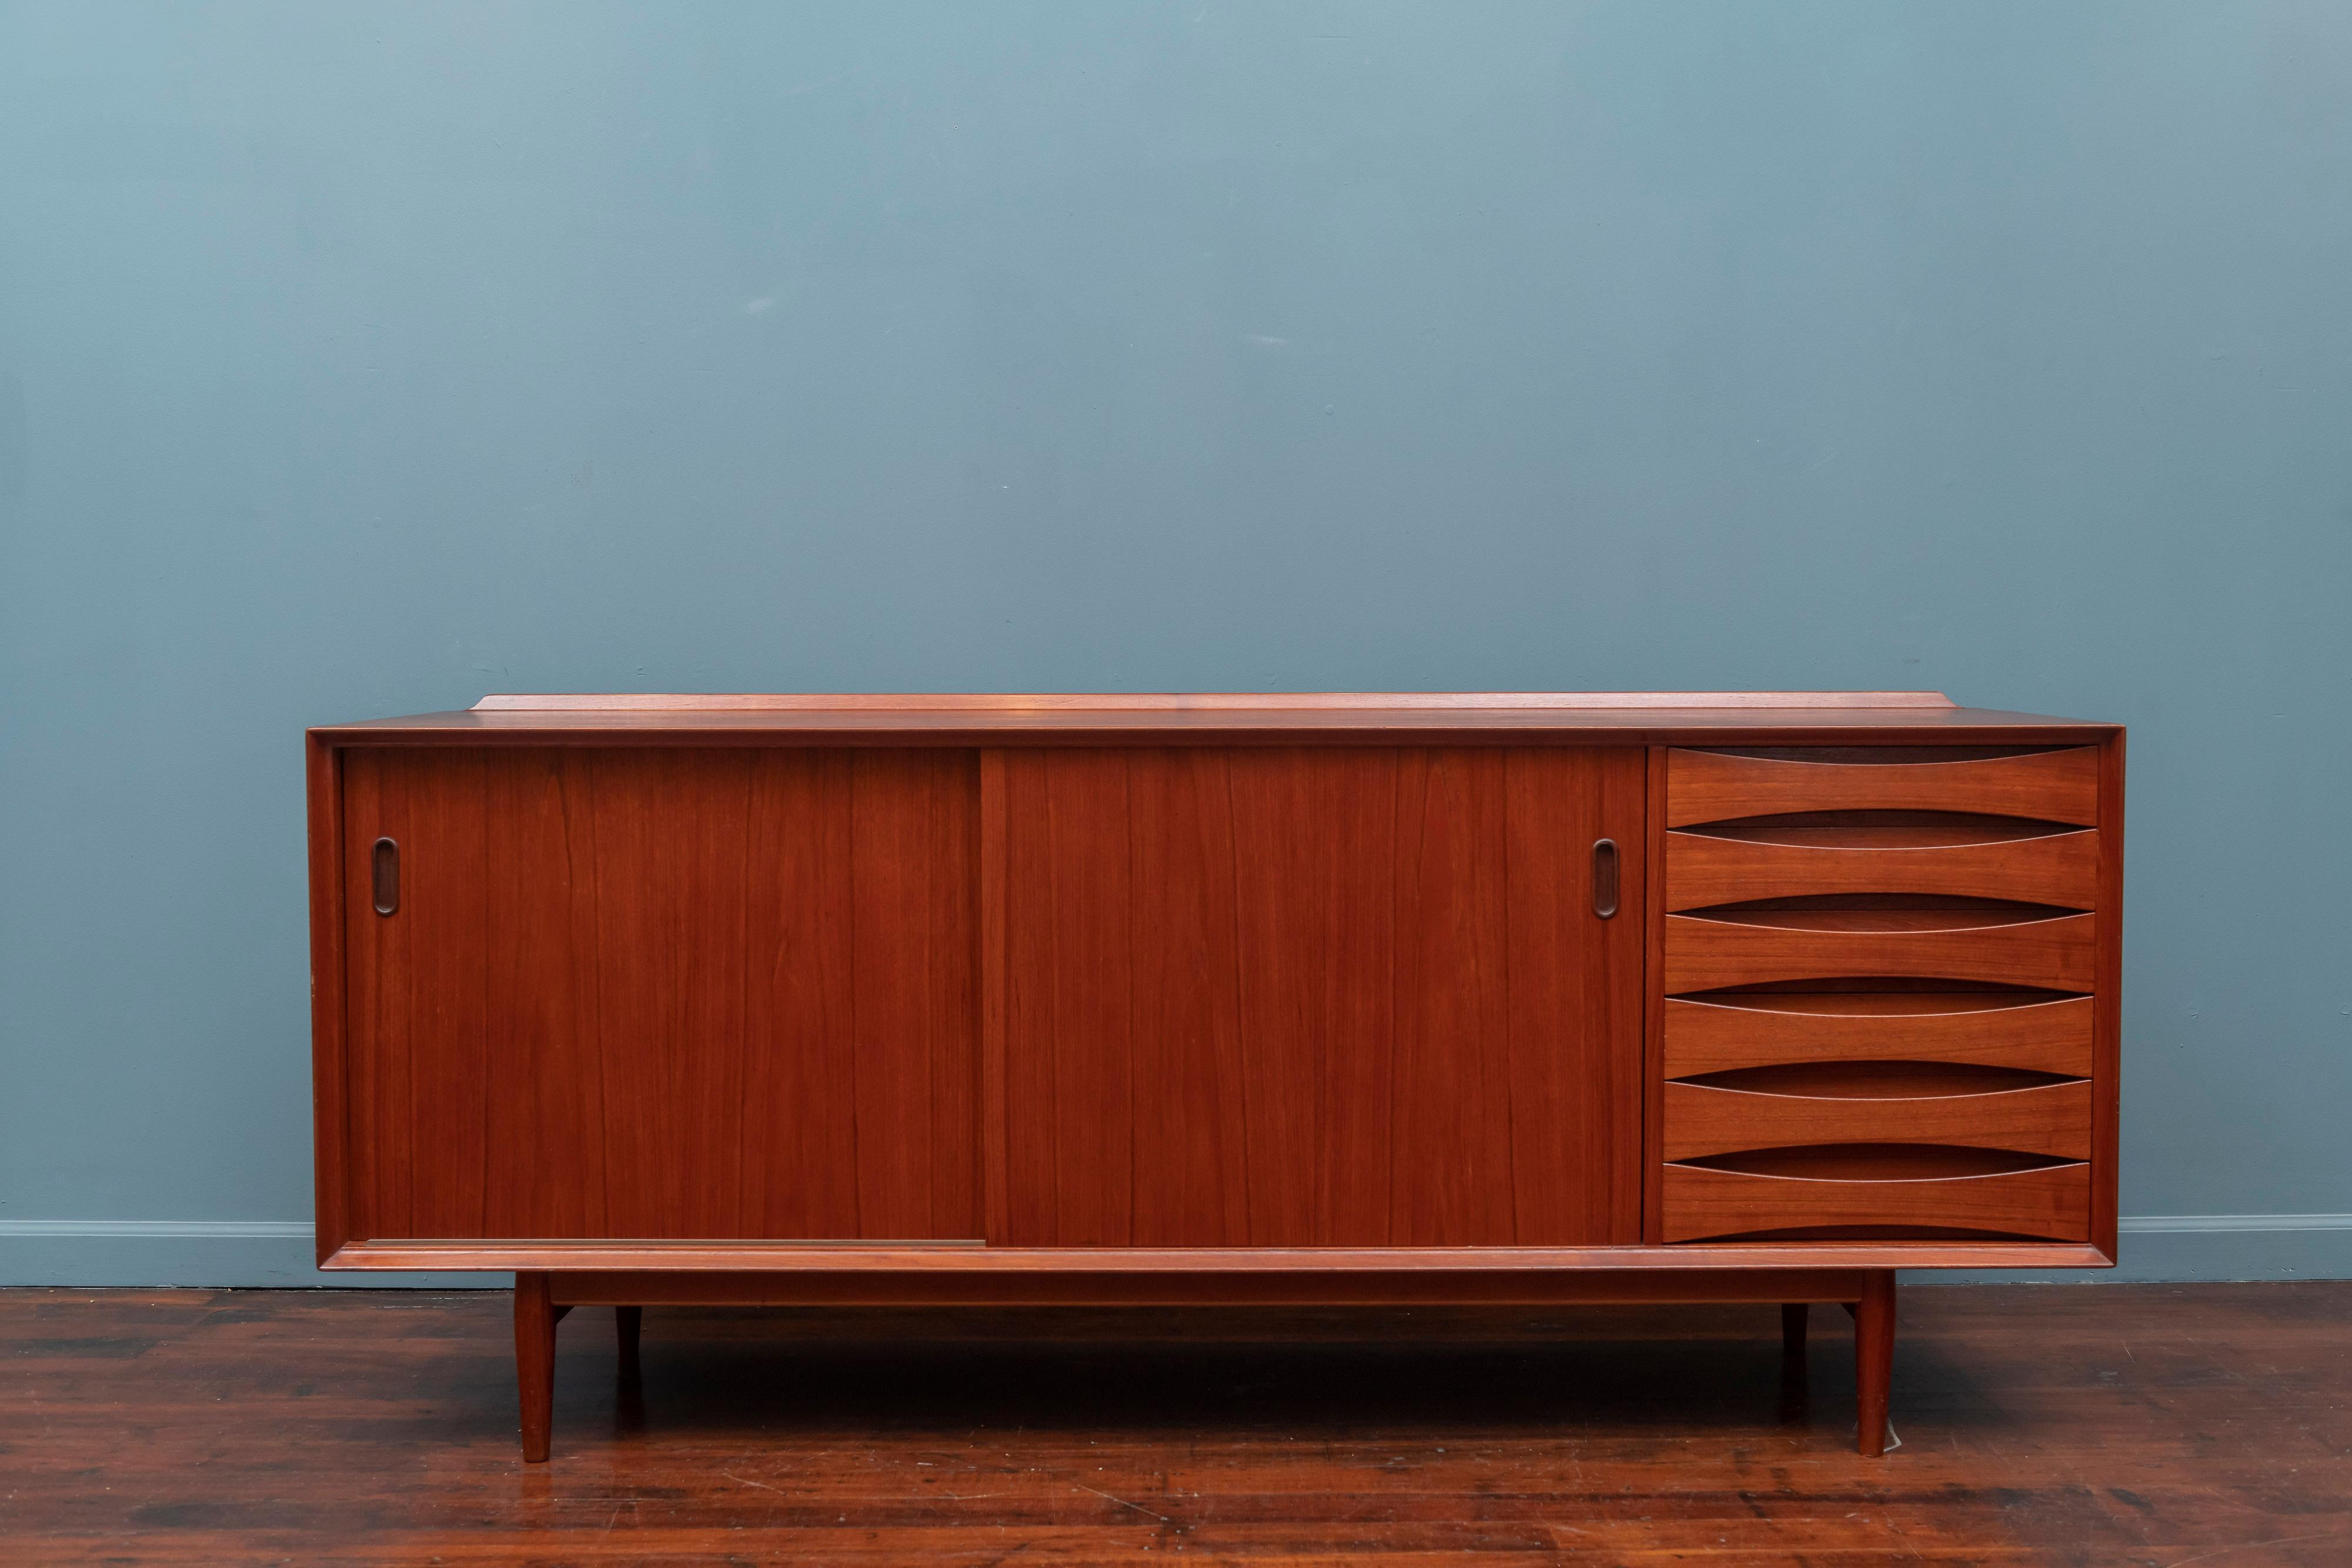 Arne Vodder design teak credenza Model 29 for Sibast Mobler, Denmark. High quality construction and attention to detail with two reversible sliding doors and adjustable shelves. 
Very good condition with minor wear and signs of use to the top and